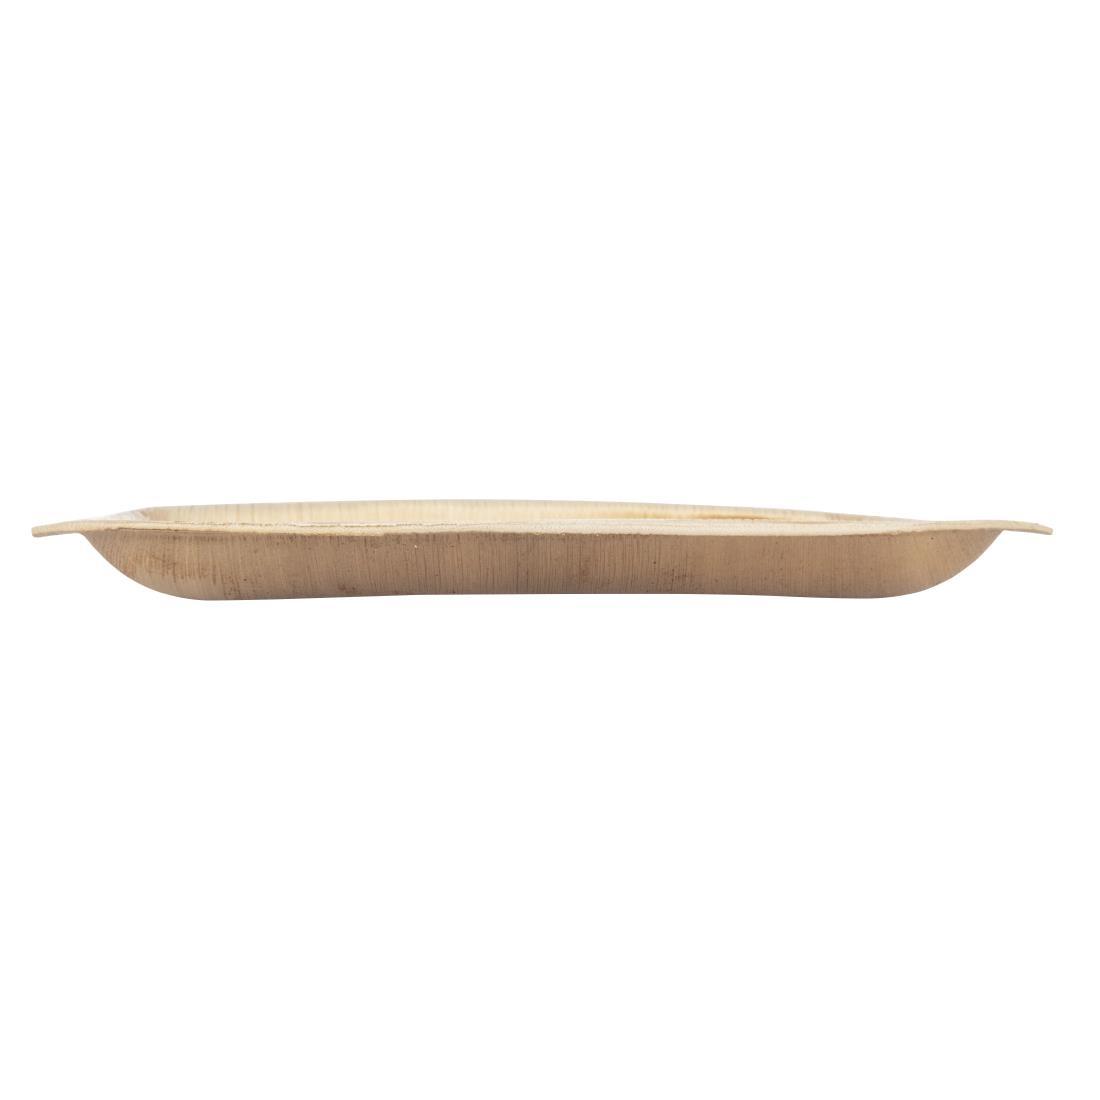 Fiesta Compostable Palm Leaf Plates Square 200mm (Pack of 100) - DK376  - 5